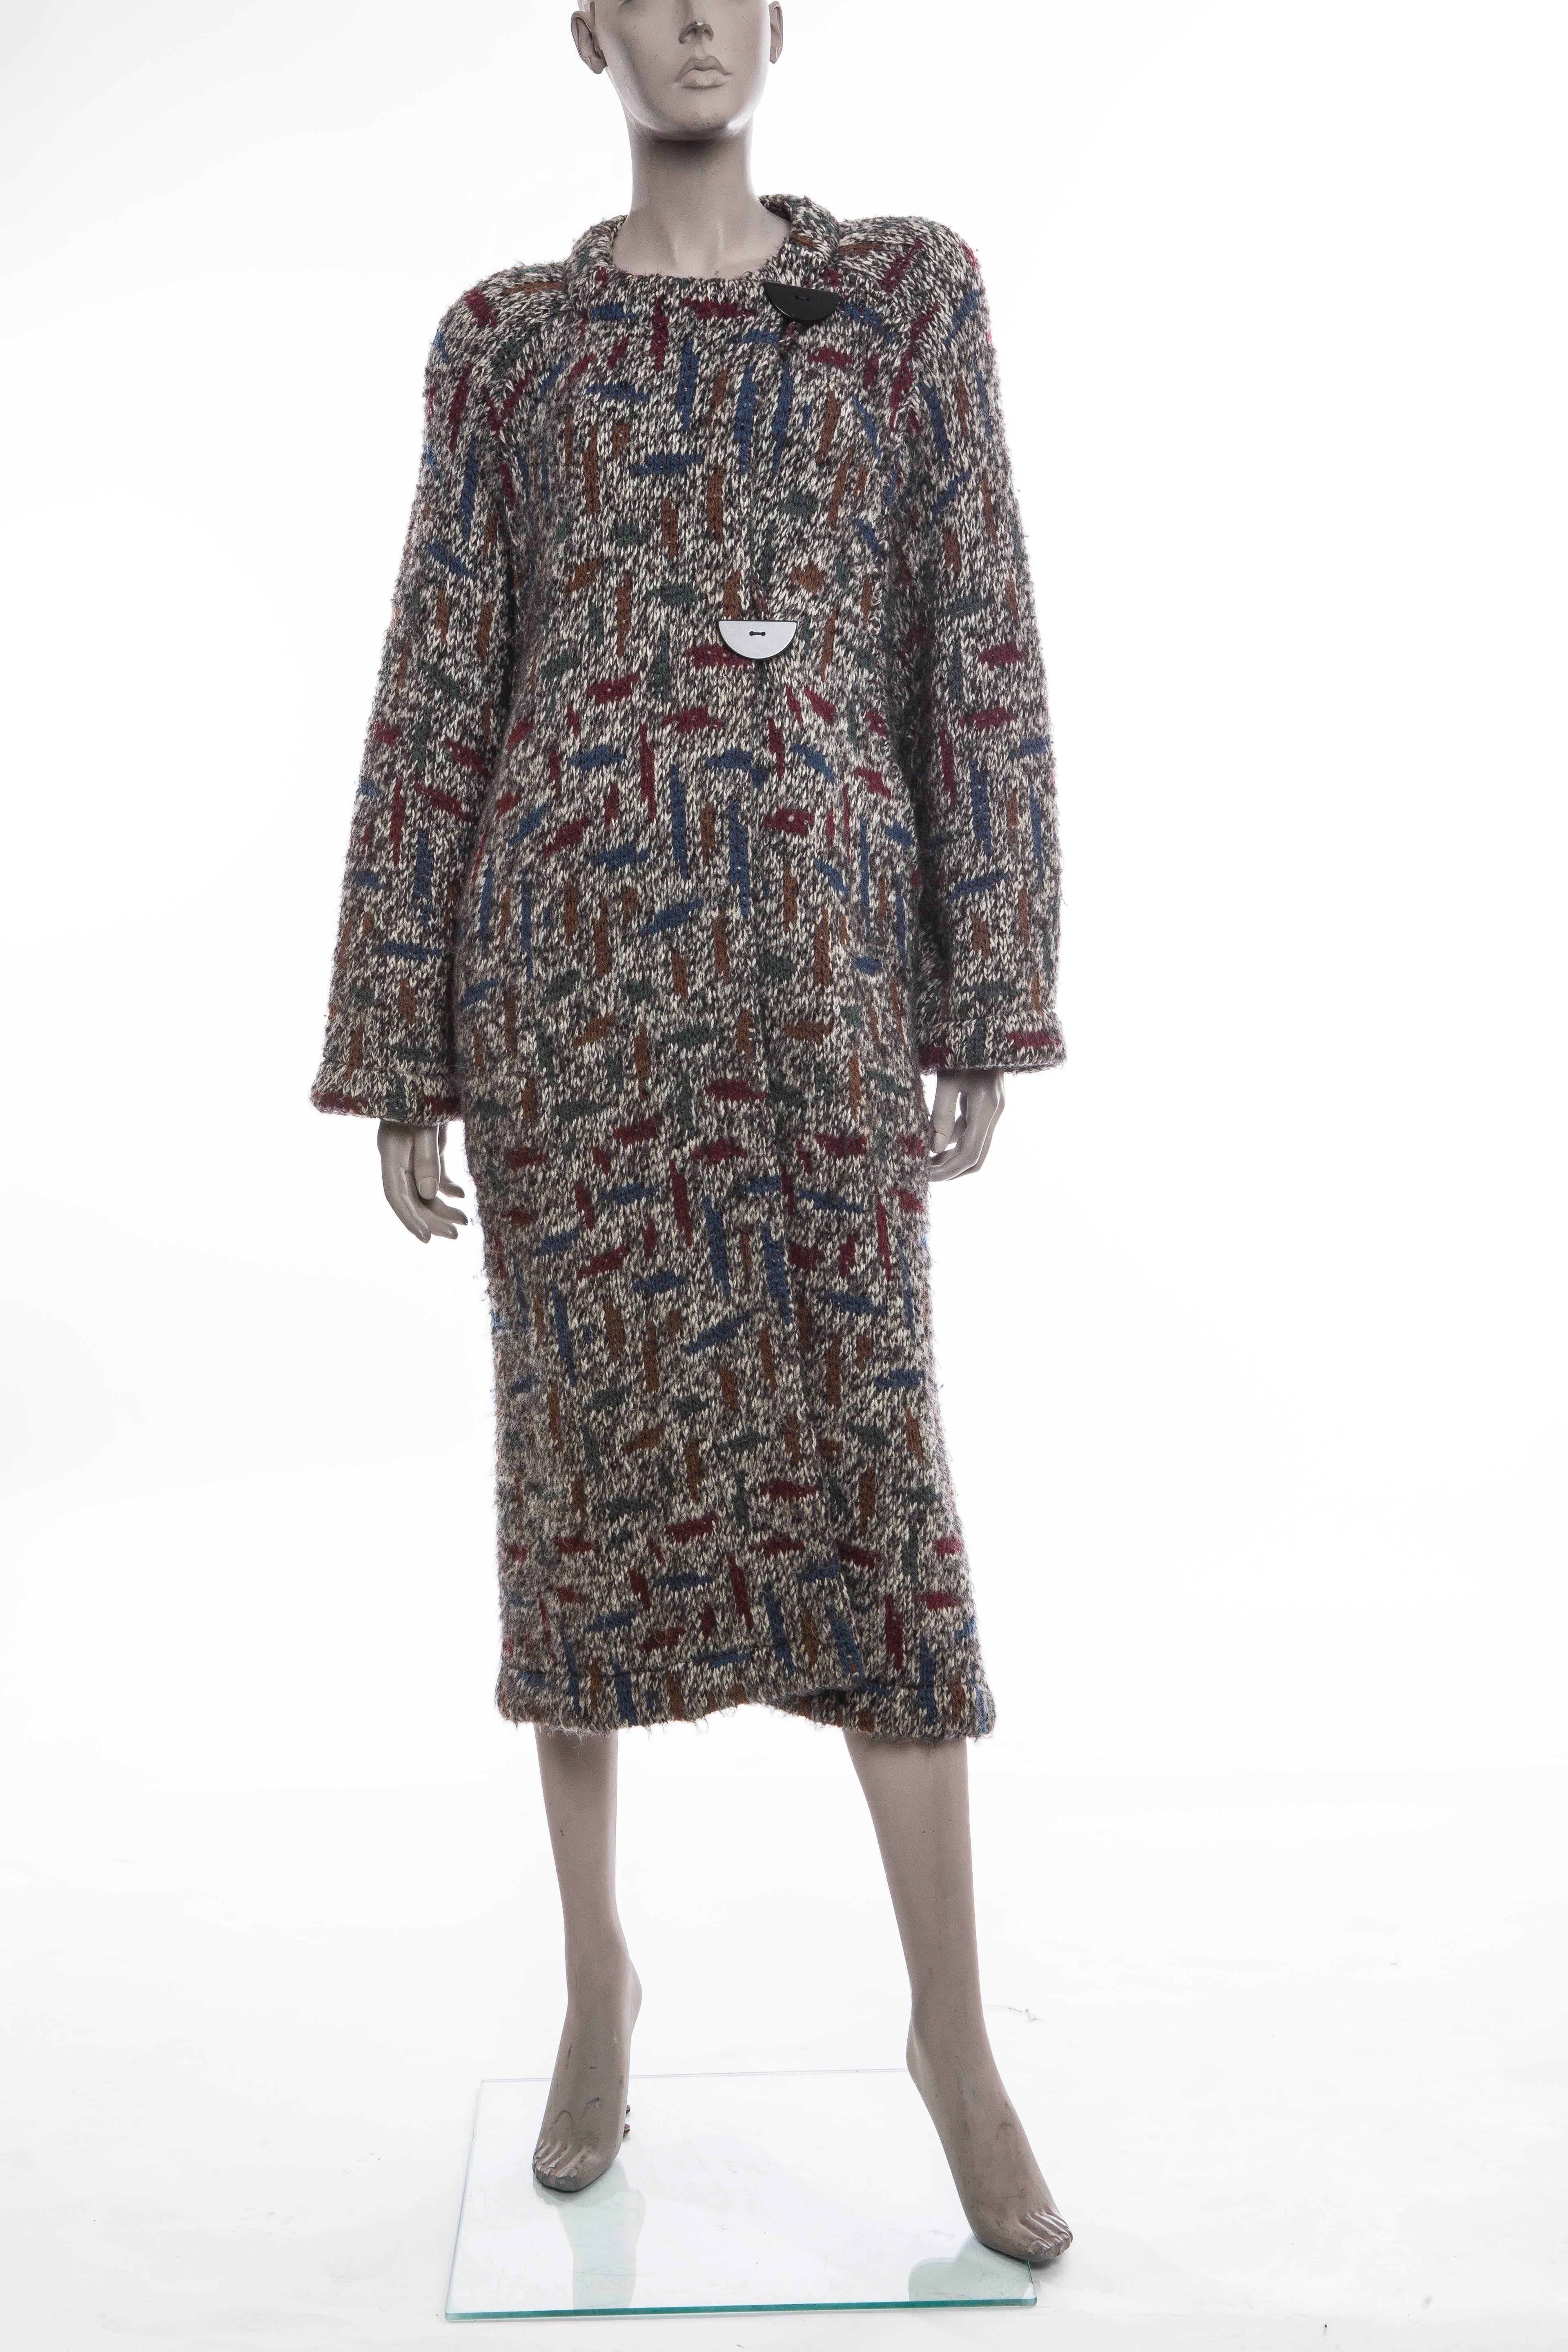 Missoni, circa 1980's, gold label,button front, graphic sweater coat with two front pockets.